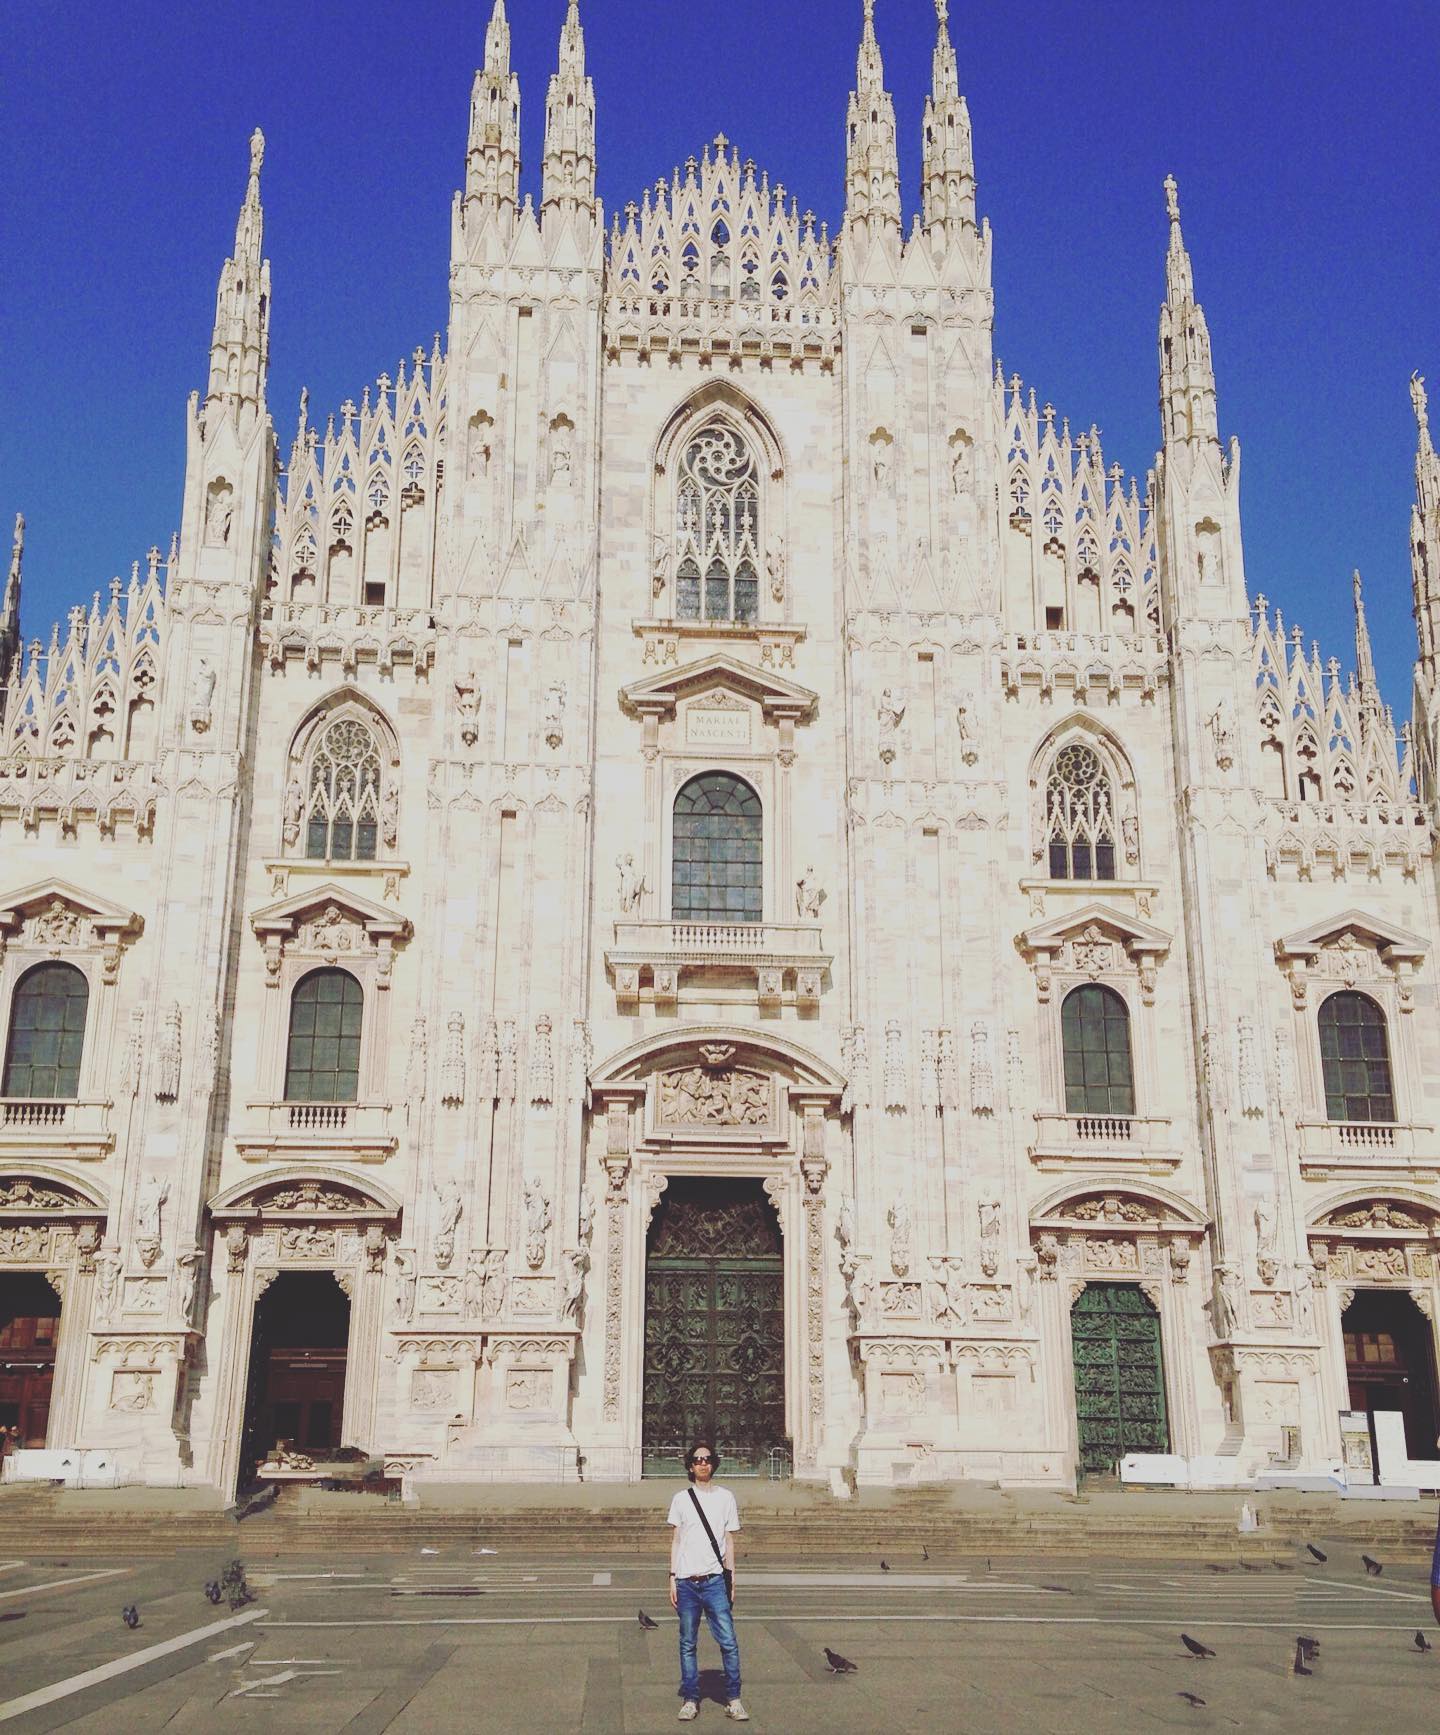 A postcard from Milan, 'Ciao' See you again next season in the New Year! xo
.
#Milan #duomo #travel #mfw #doyoutravel #summer #italy #fashion #travels #blogger #presstrip #style #culture #milano #blog #milantoday #milano_bestphoto #italia #architecture #piazzaduomo #milano #easyJetter